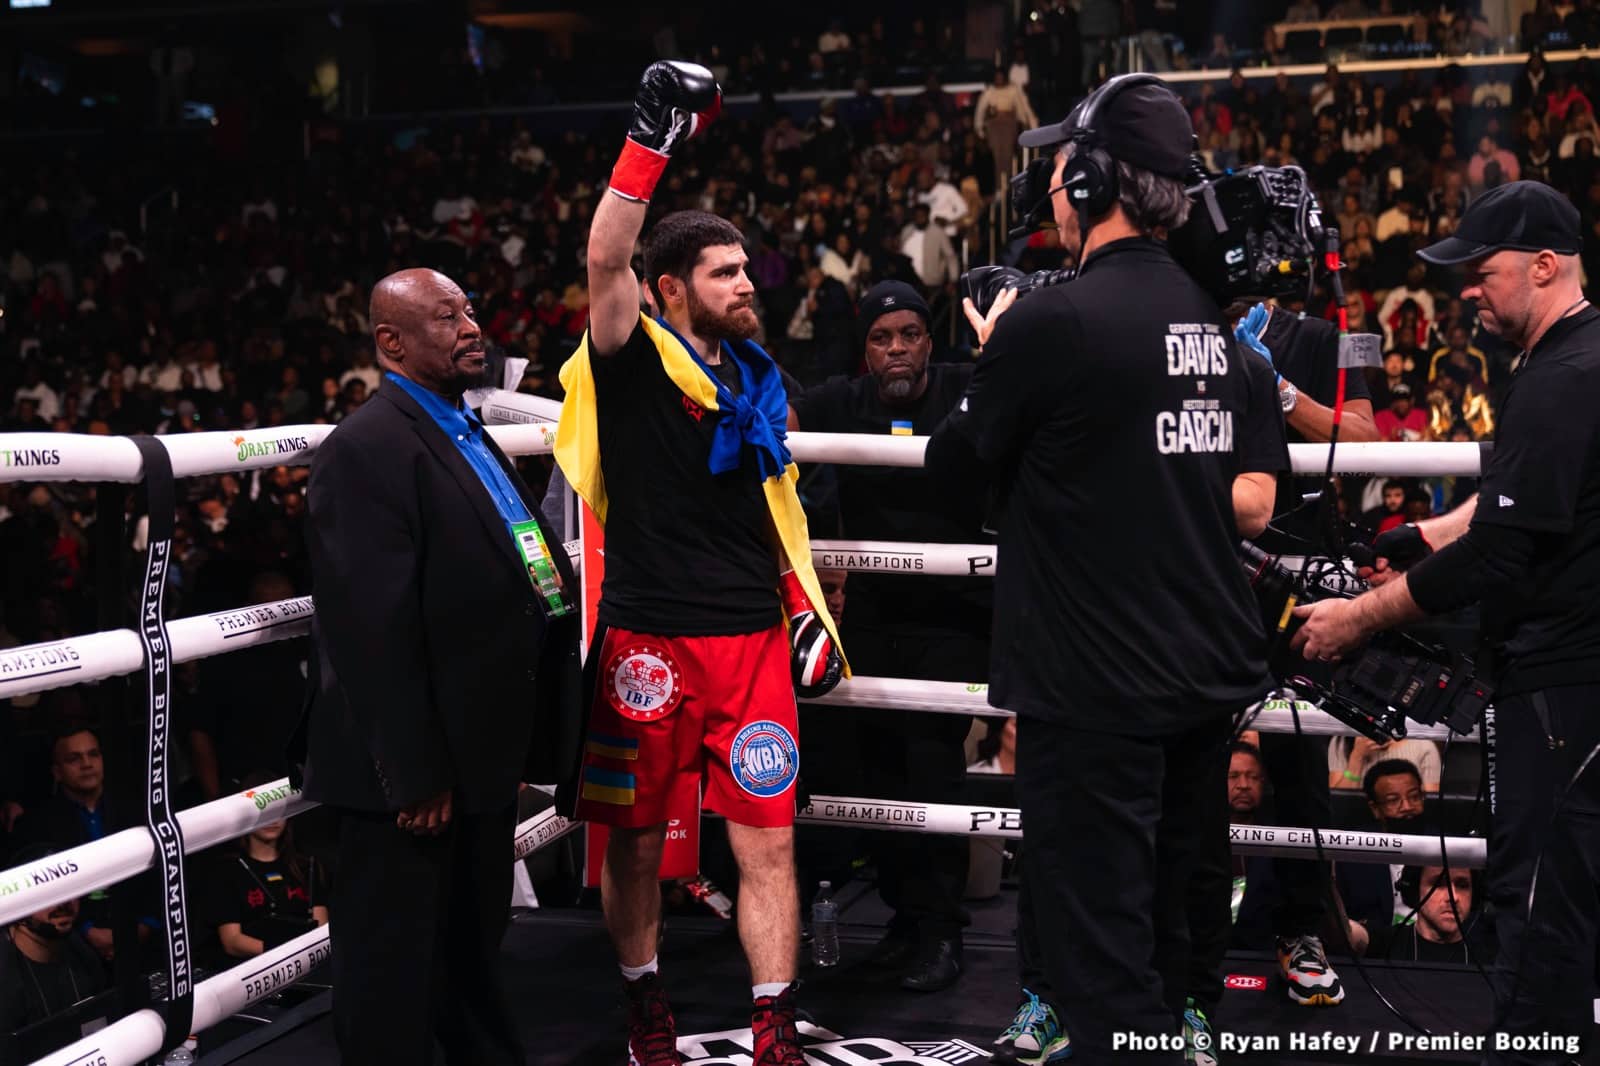 Image: Results / Photos: Jaron Ennis Wins - “Everyone knows I want Spence”